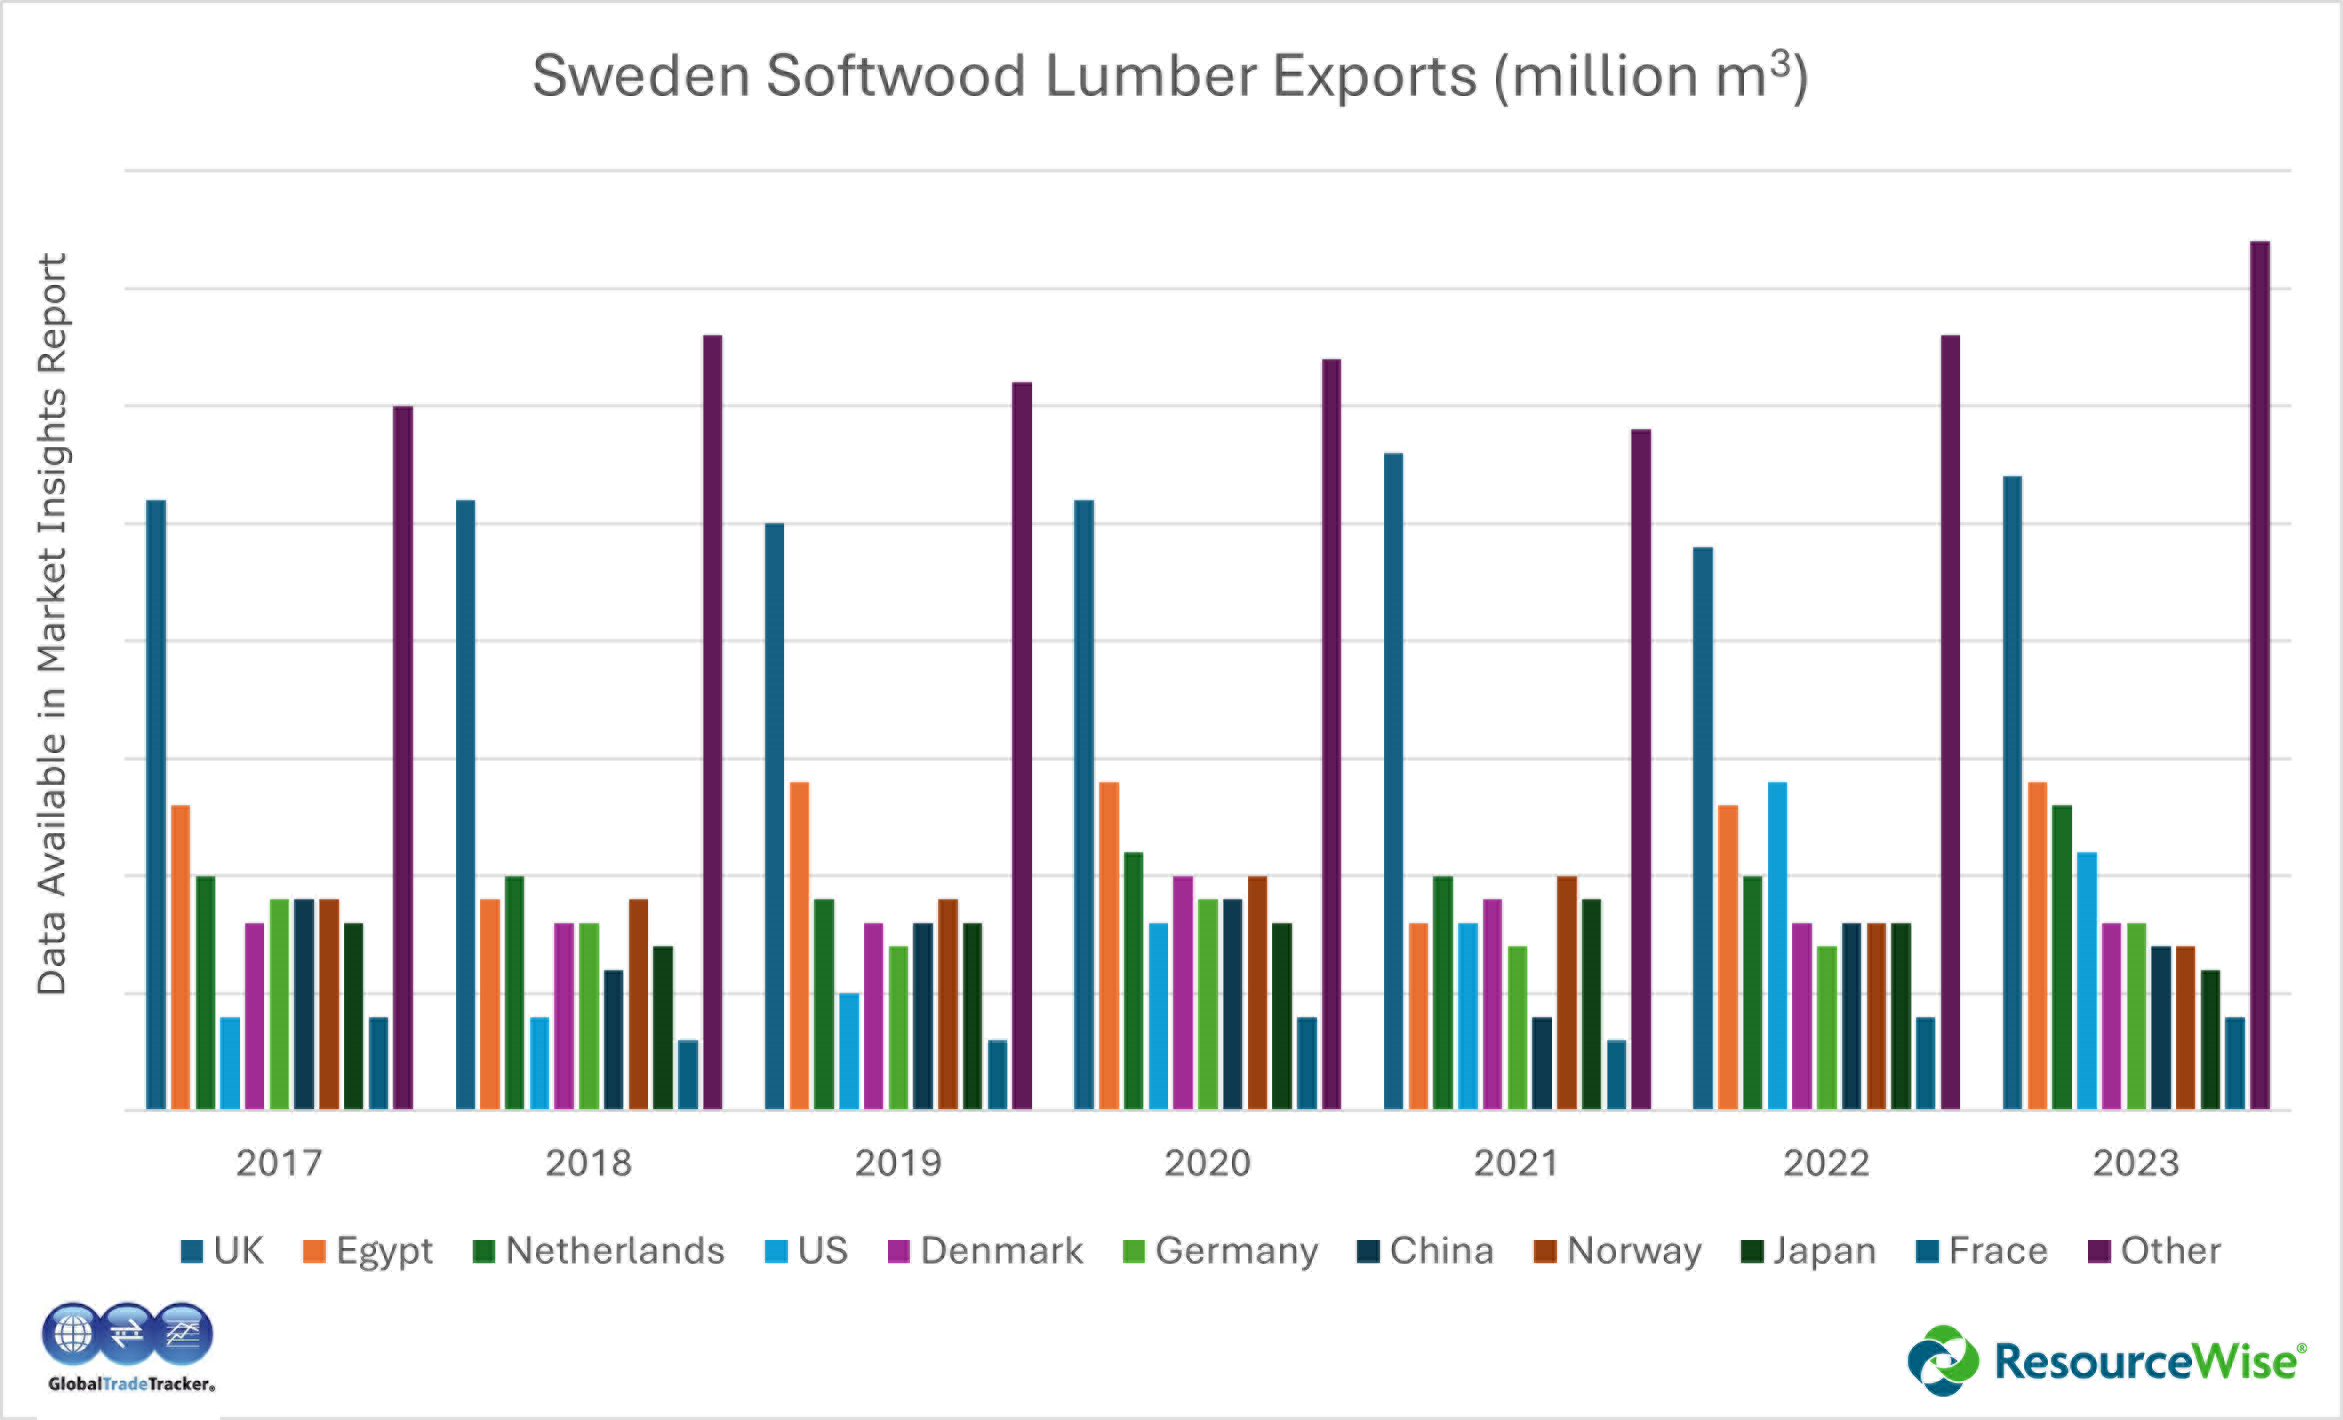 An Overview of the Rise in Sweden's Softwood Lumber Exports